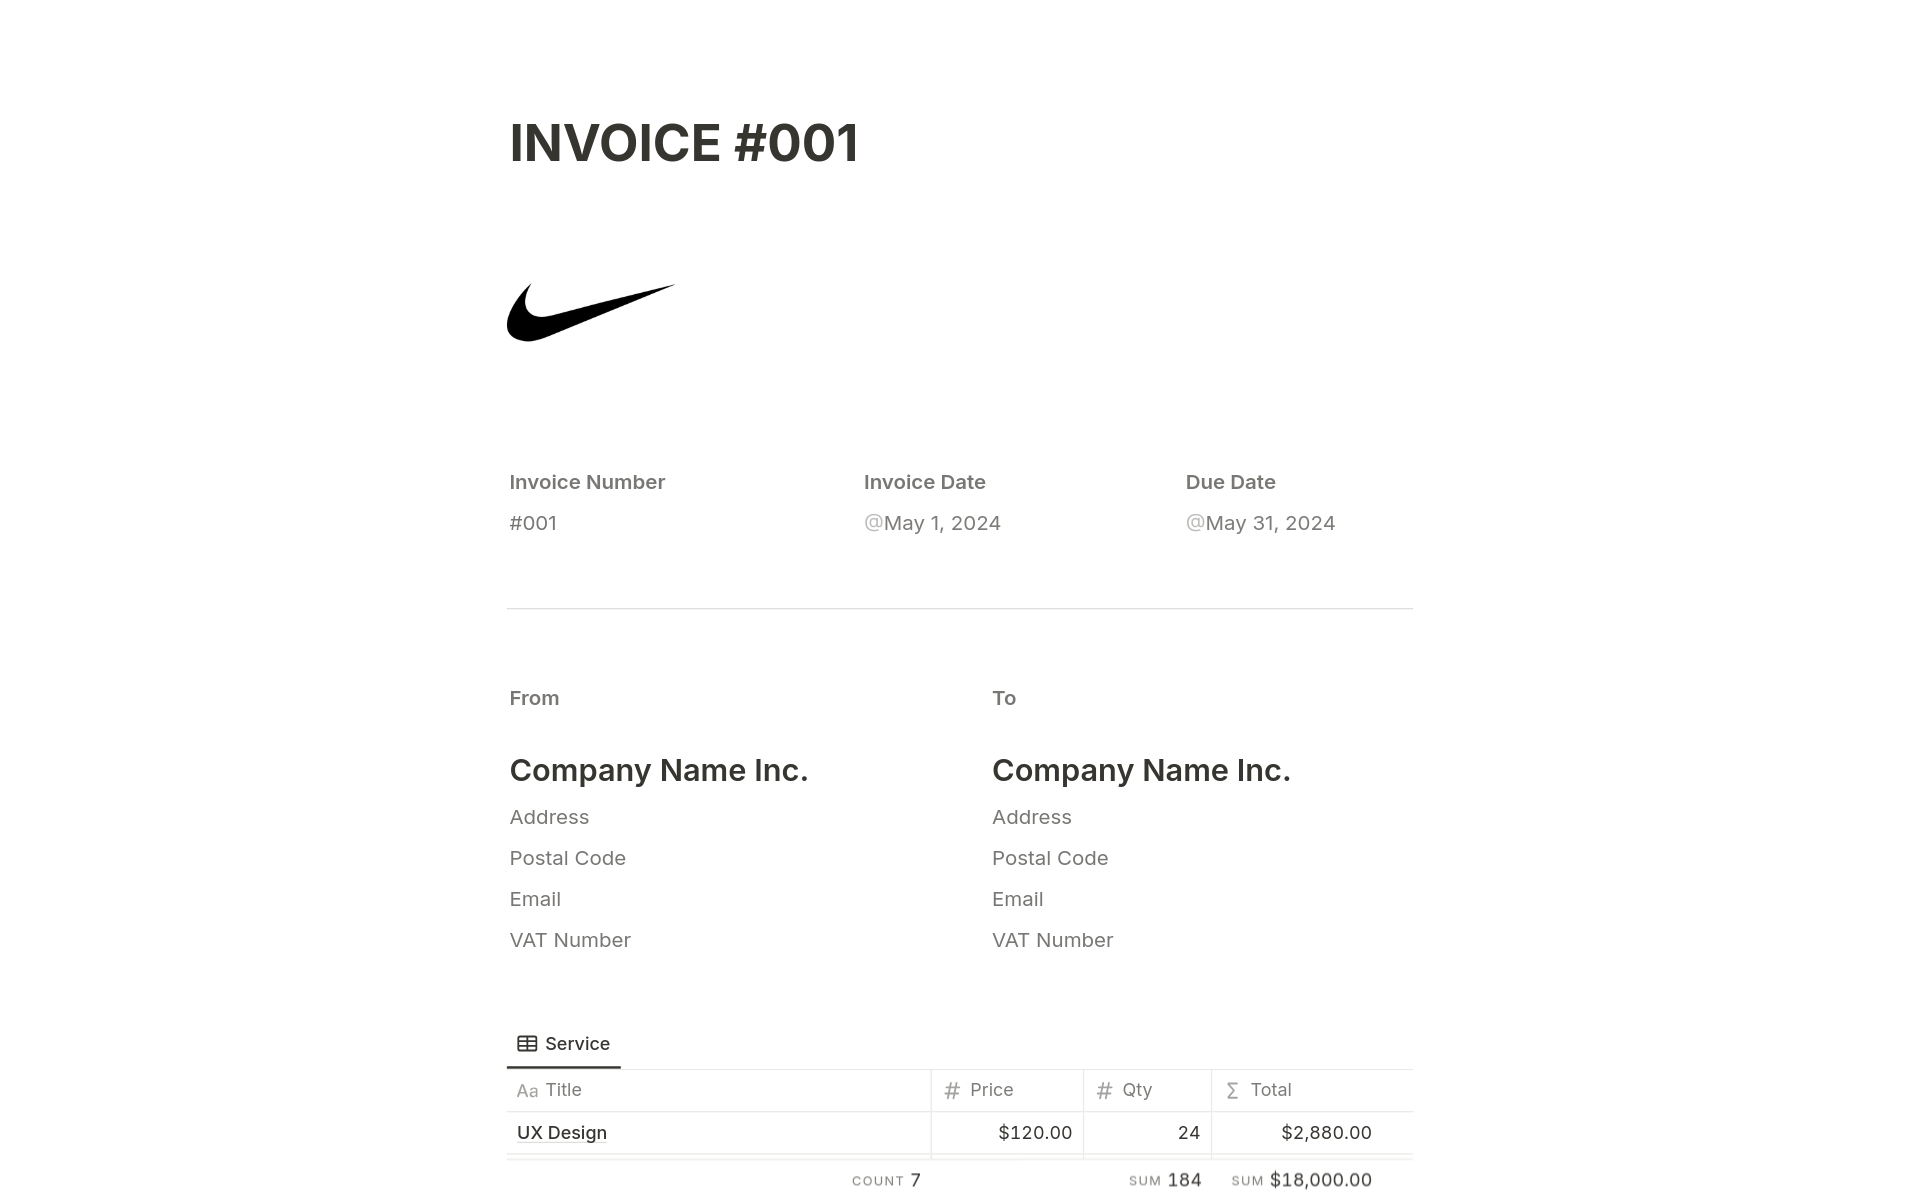 Create your invoice document in minutes

